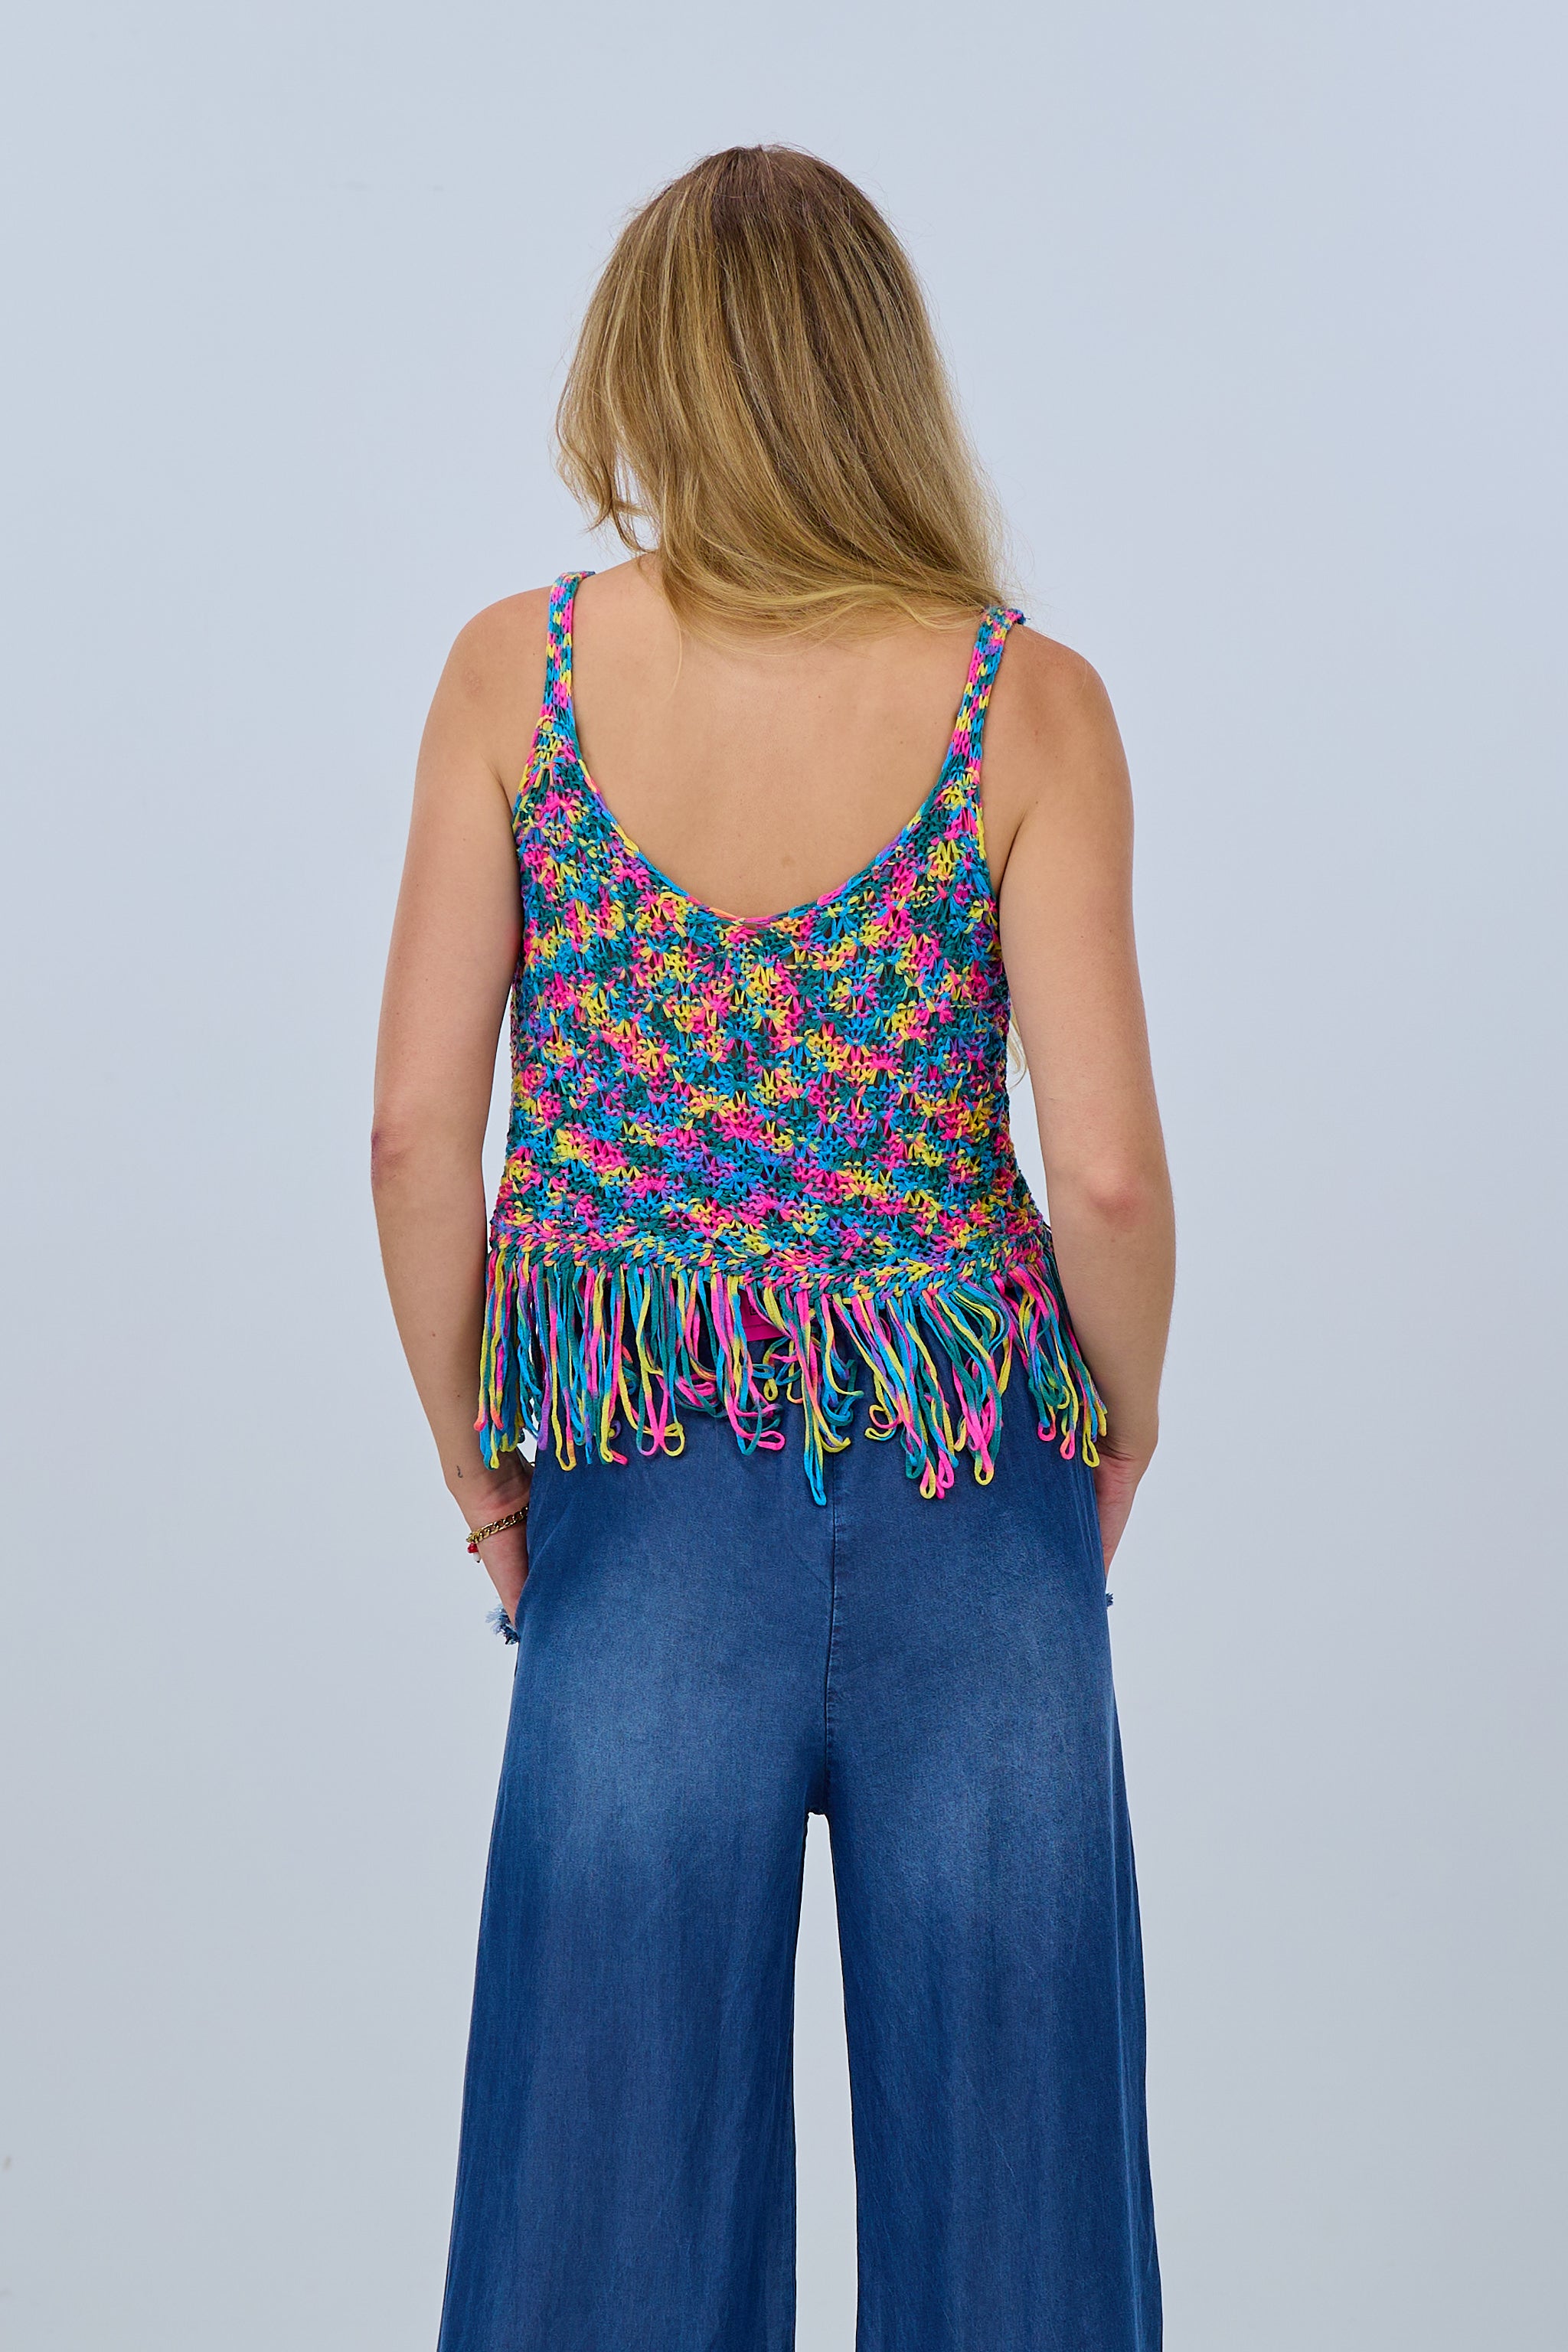 Knit top with fringes, blue-pink-green